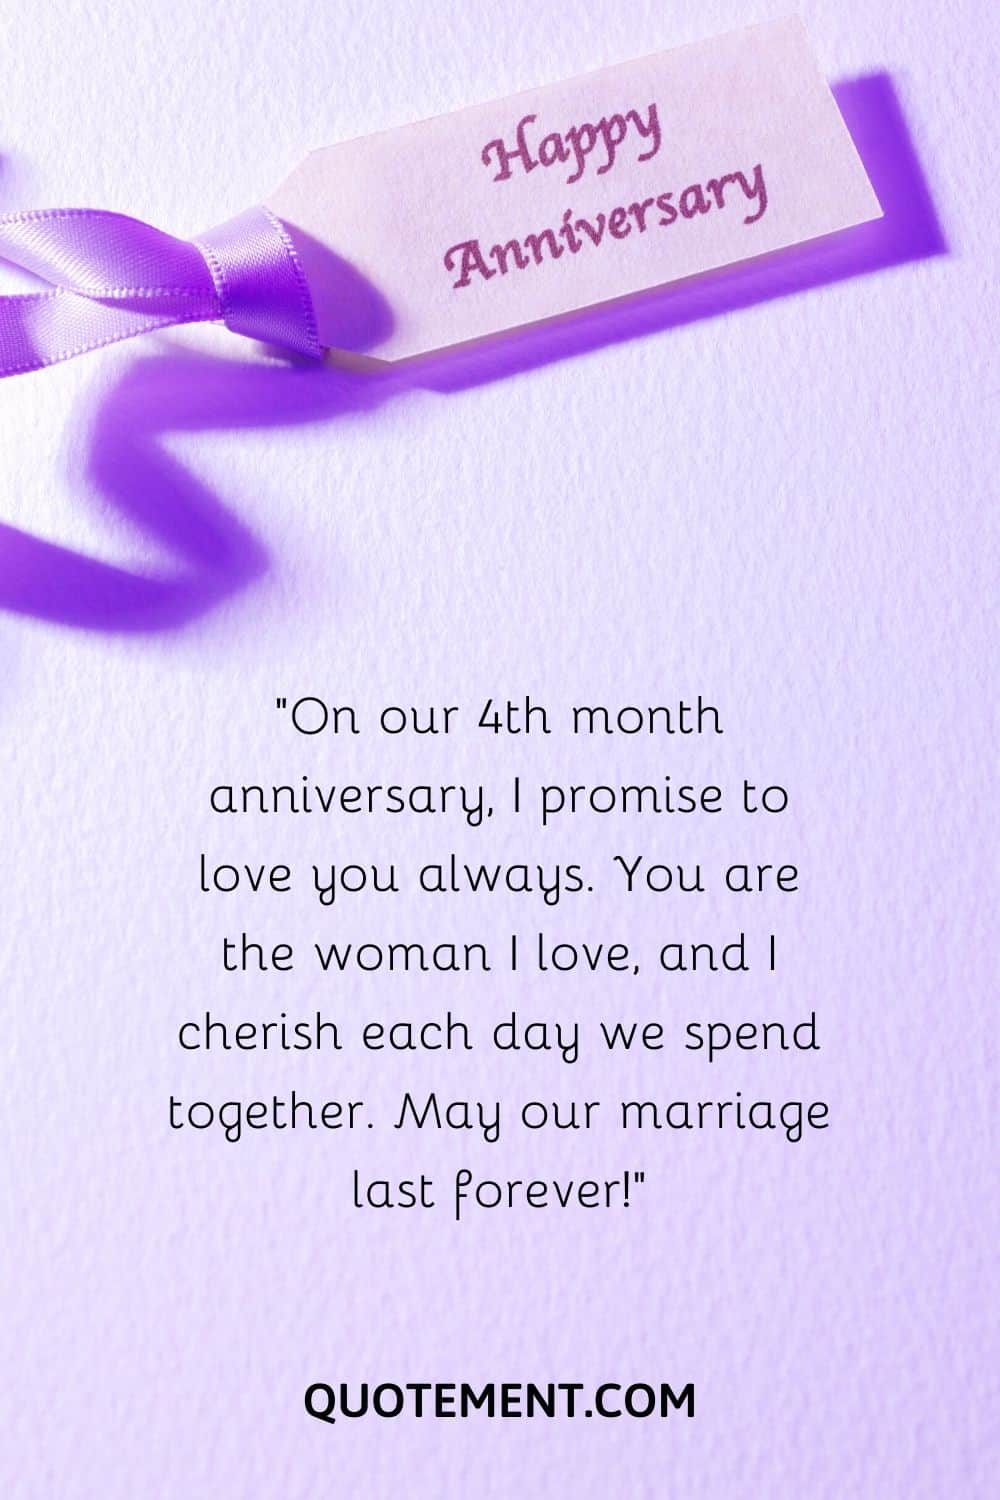 “On our 4th month anniversary, I promise to love you always.